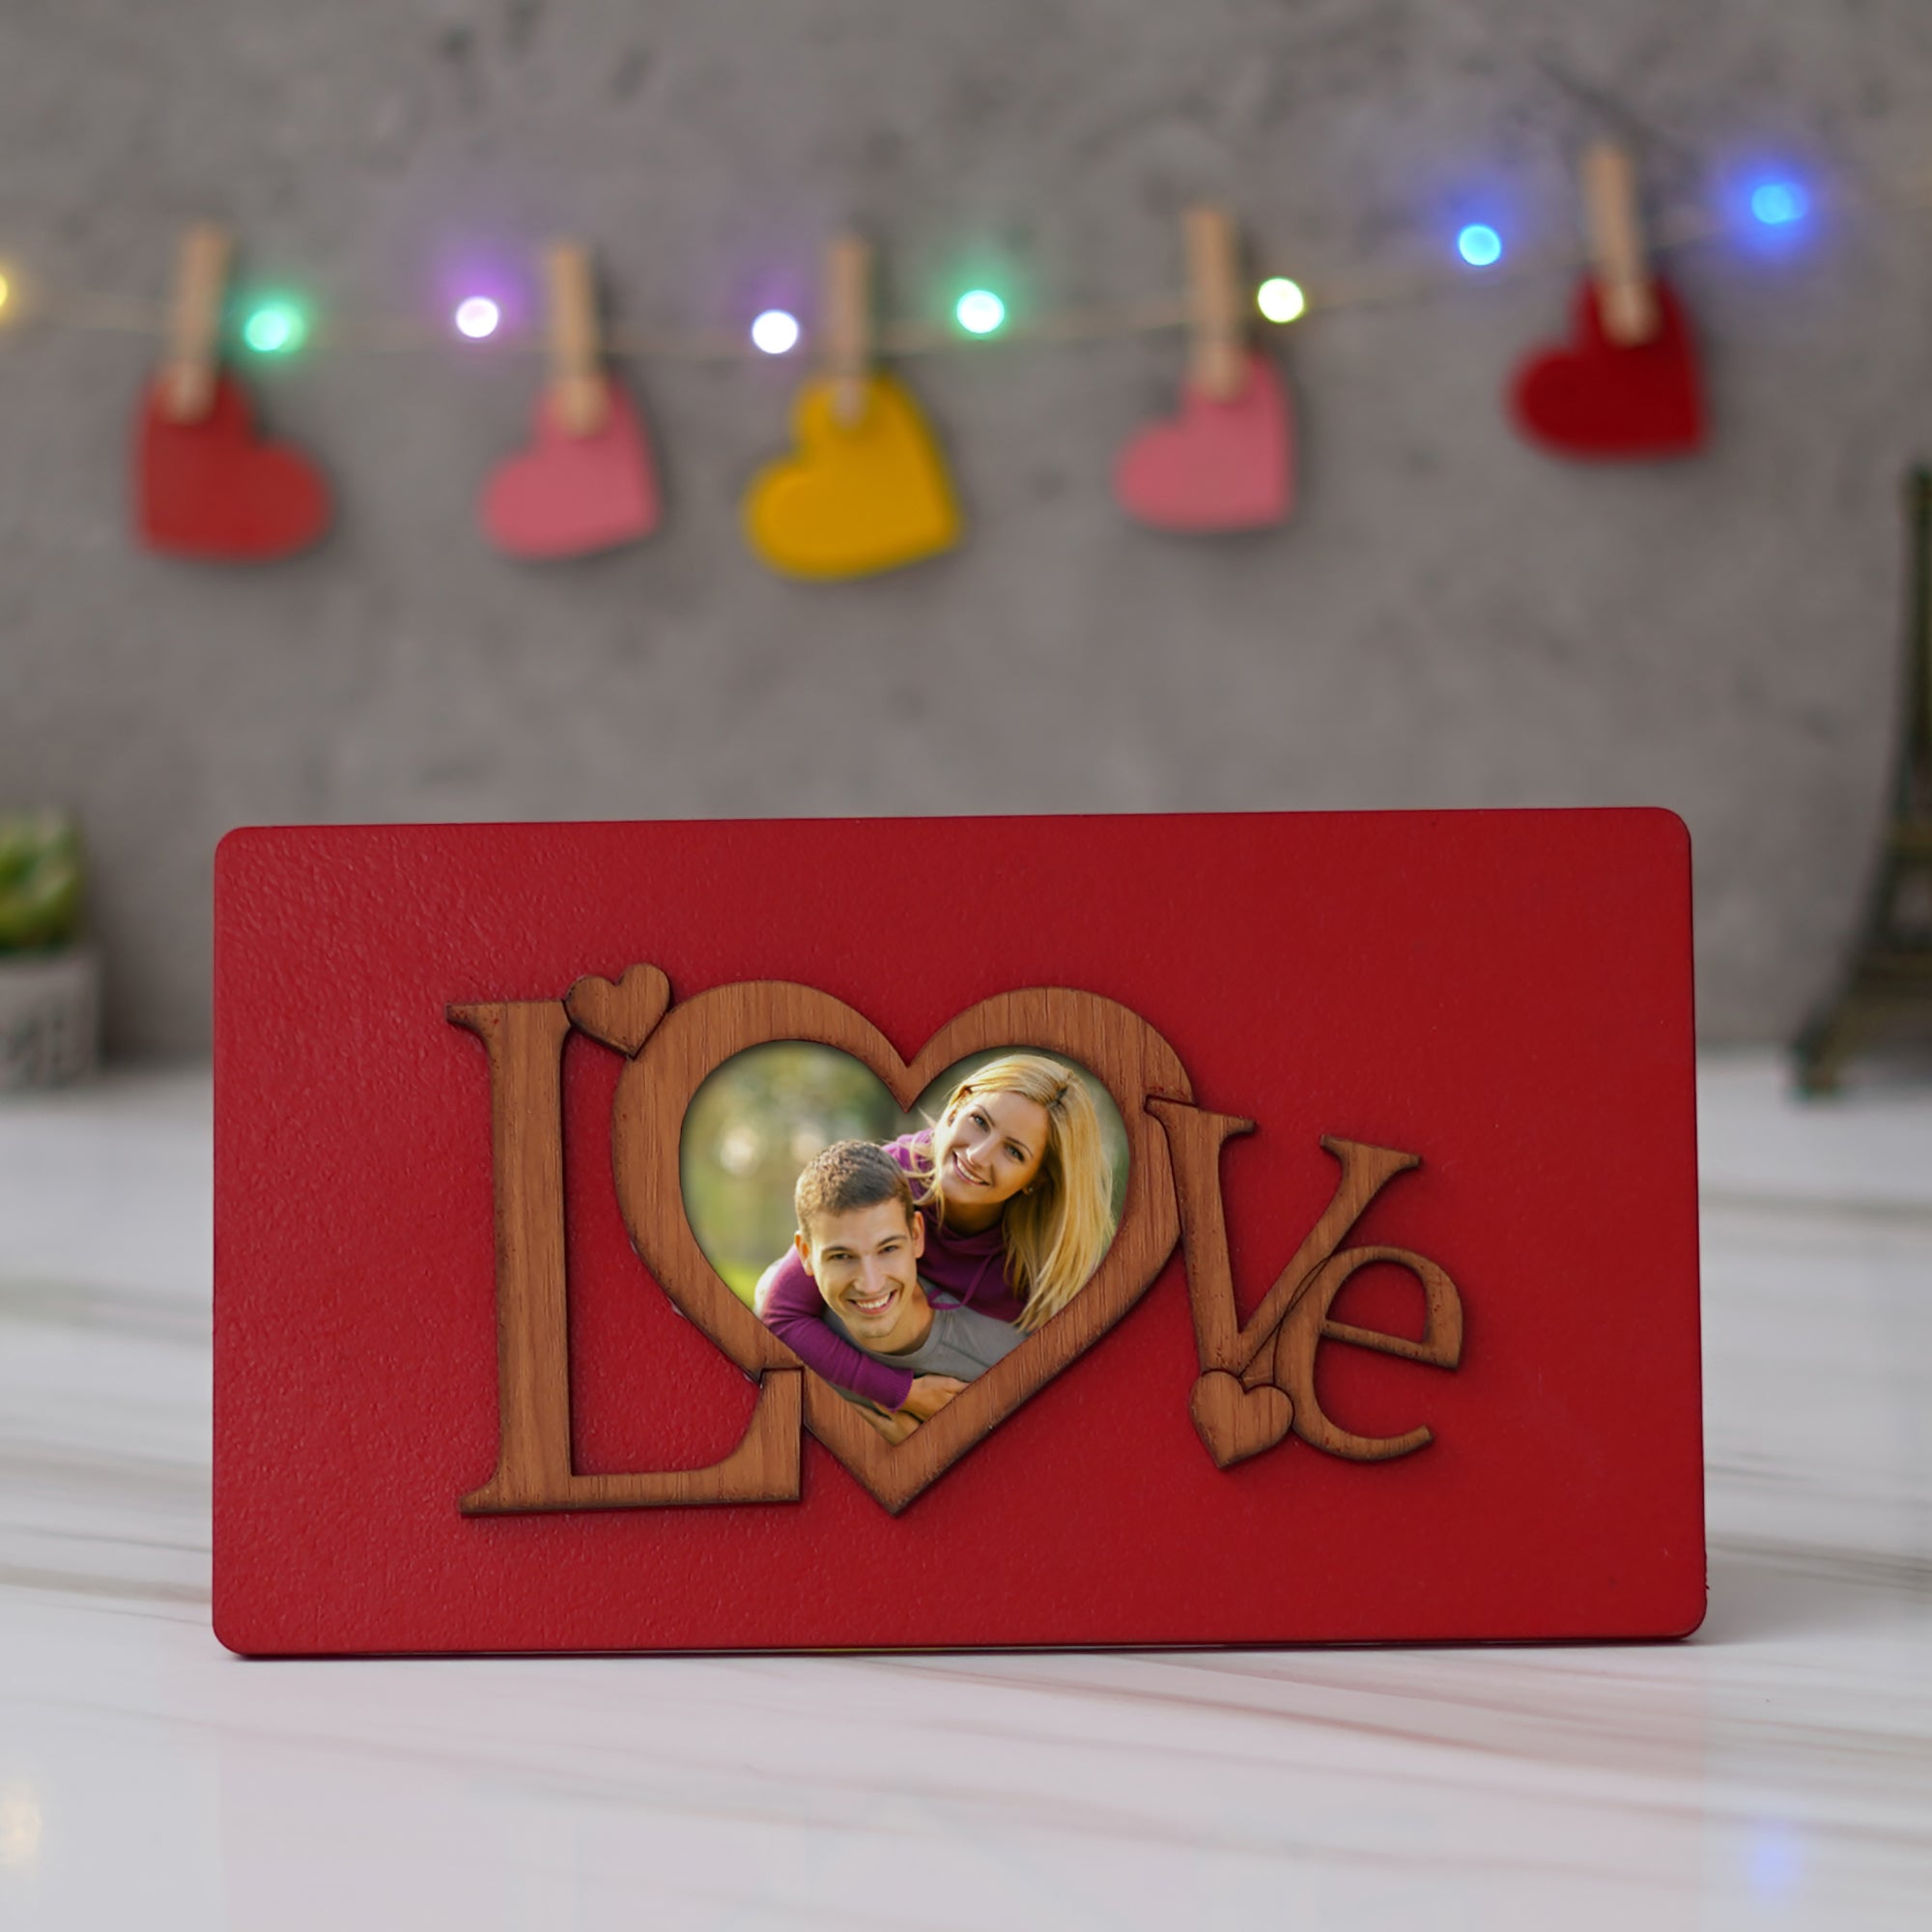 Valentine Combo of Pack of 12 Love Coupons Gift Cards Set, Golden Rose Gift Set, "Love" Wooden Photo Frame With Red Stand, Bride Kissing Groom Romantic Polyresin Decorative Showpiece 5